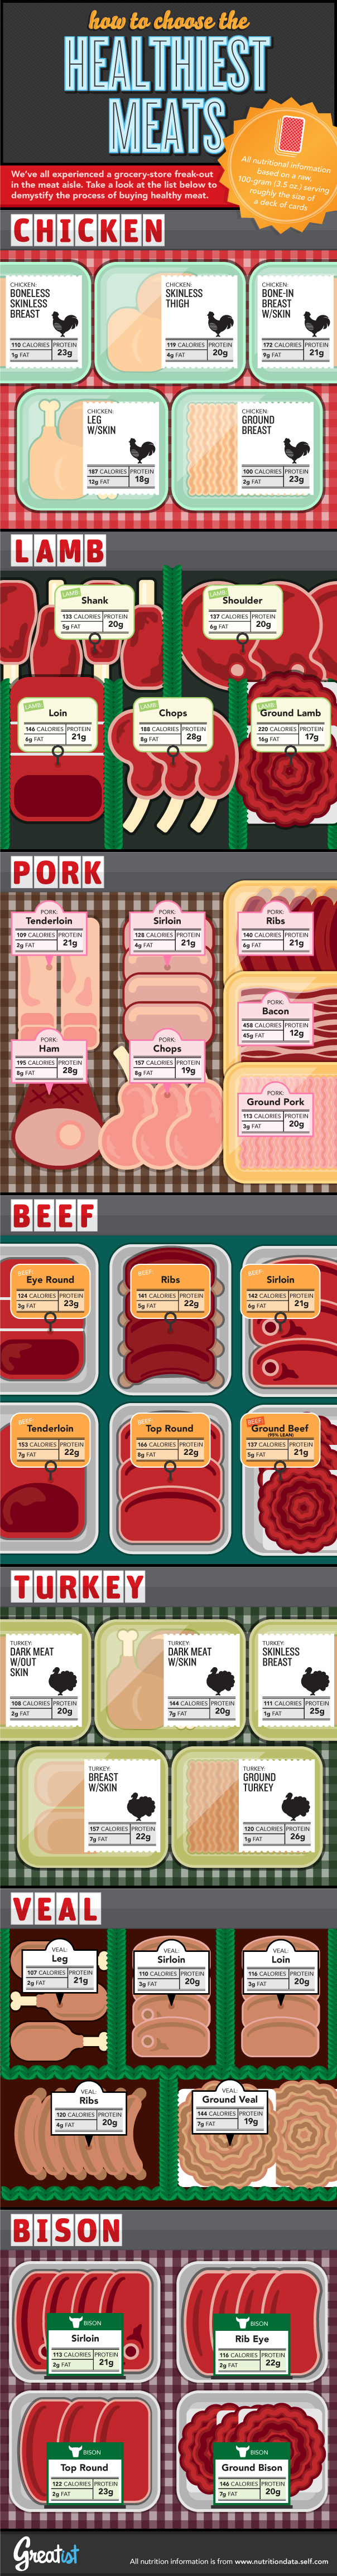 Meat Infographic - Choose Your Meat